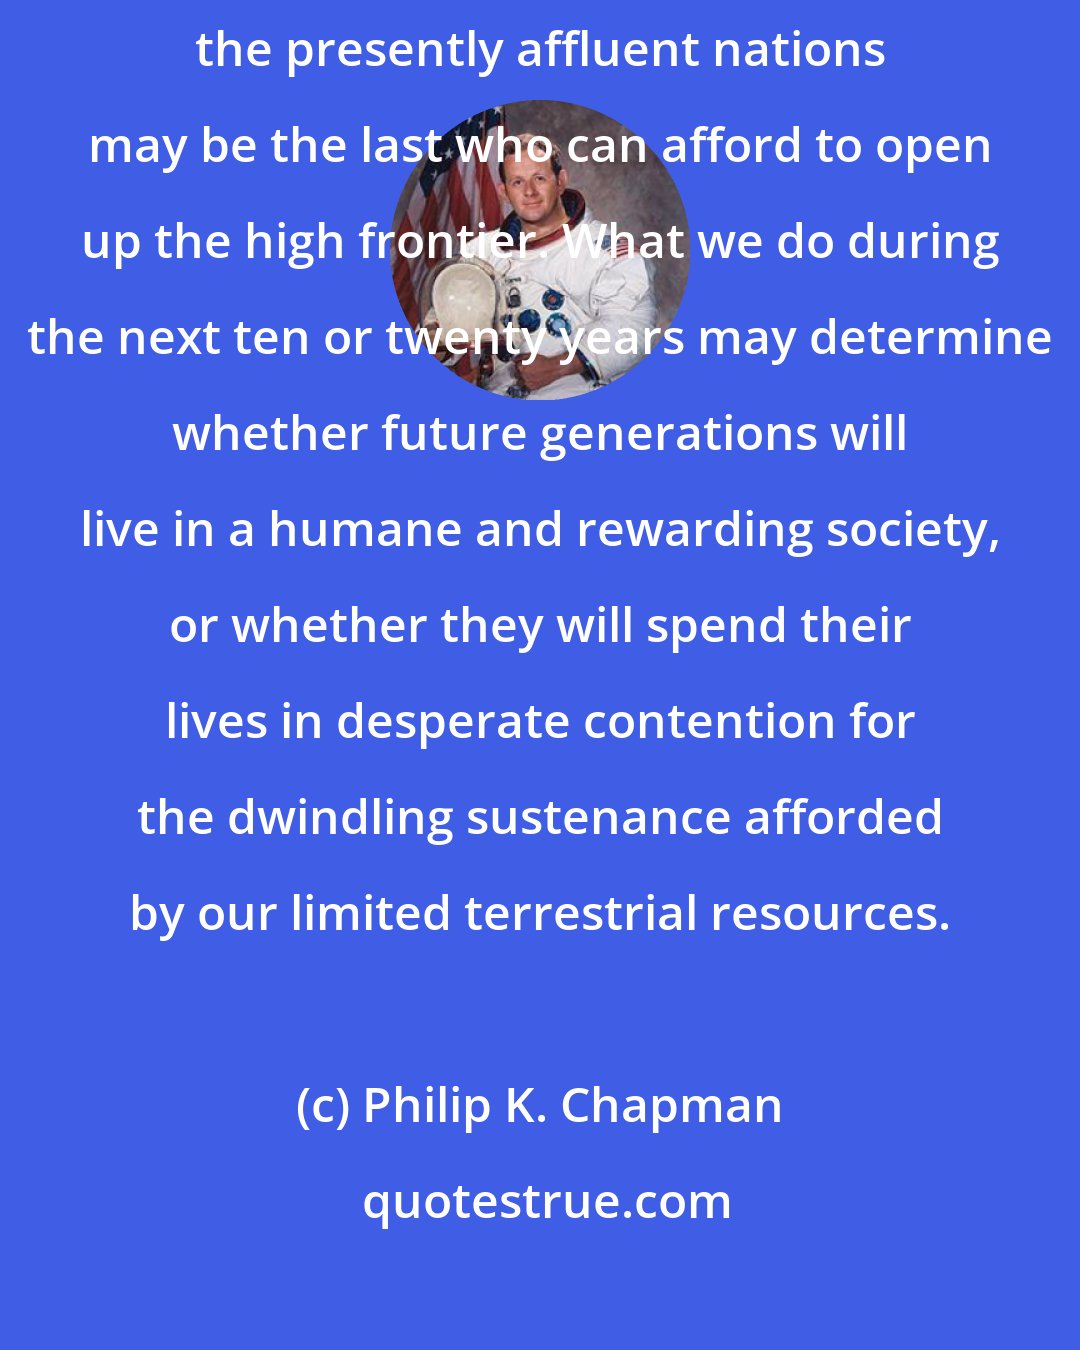 Philip K. Chapman: Our generation may stand at a crucial breakpoint in history, for we in the presently affluent nations may be the last who can afford to open up the high frontier. What we do during the next ten or twenty years may determine whether future generations will live in a humane and rewarding society, or whether they will spend their lives in desperate contention for the dwindling sustenance afforded by our limited terrestrial resources.